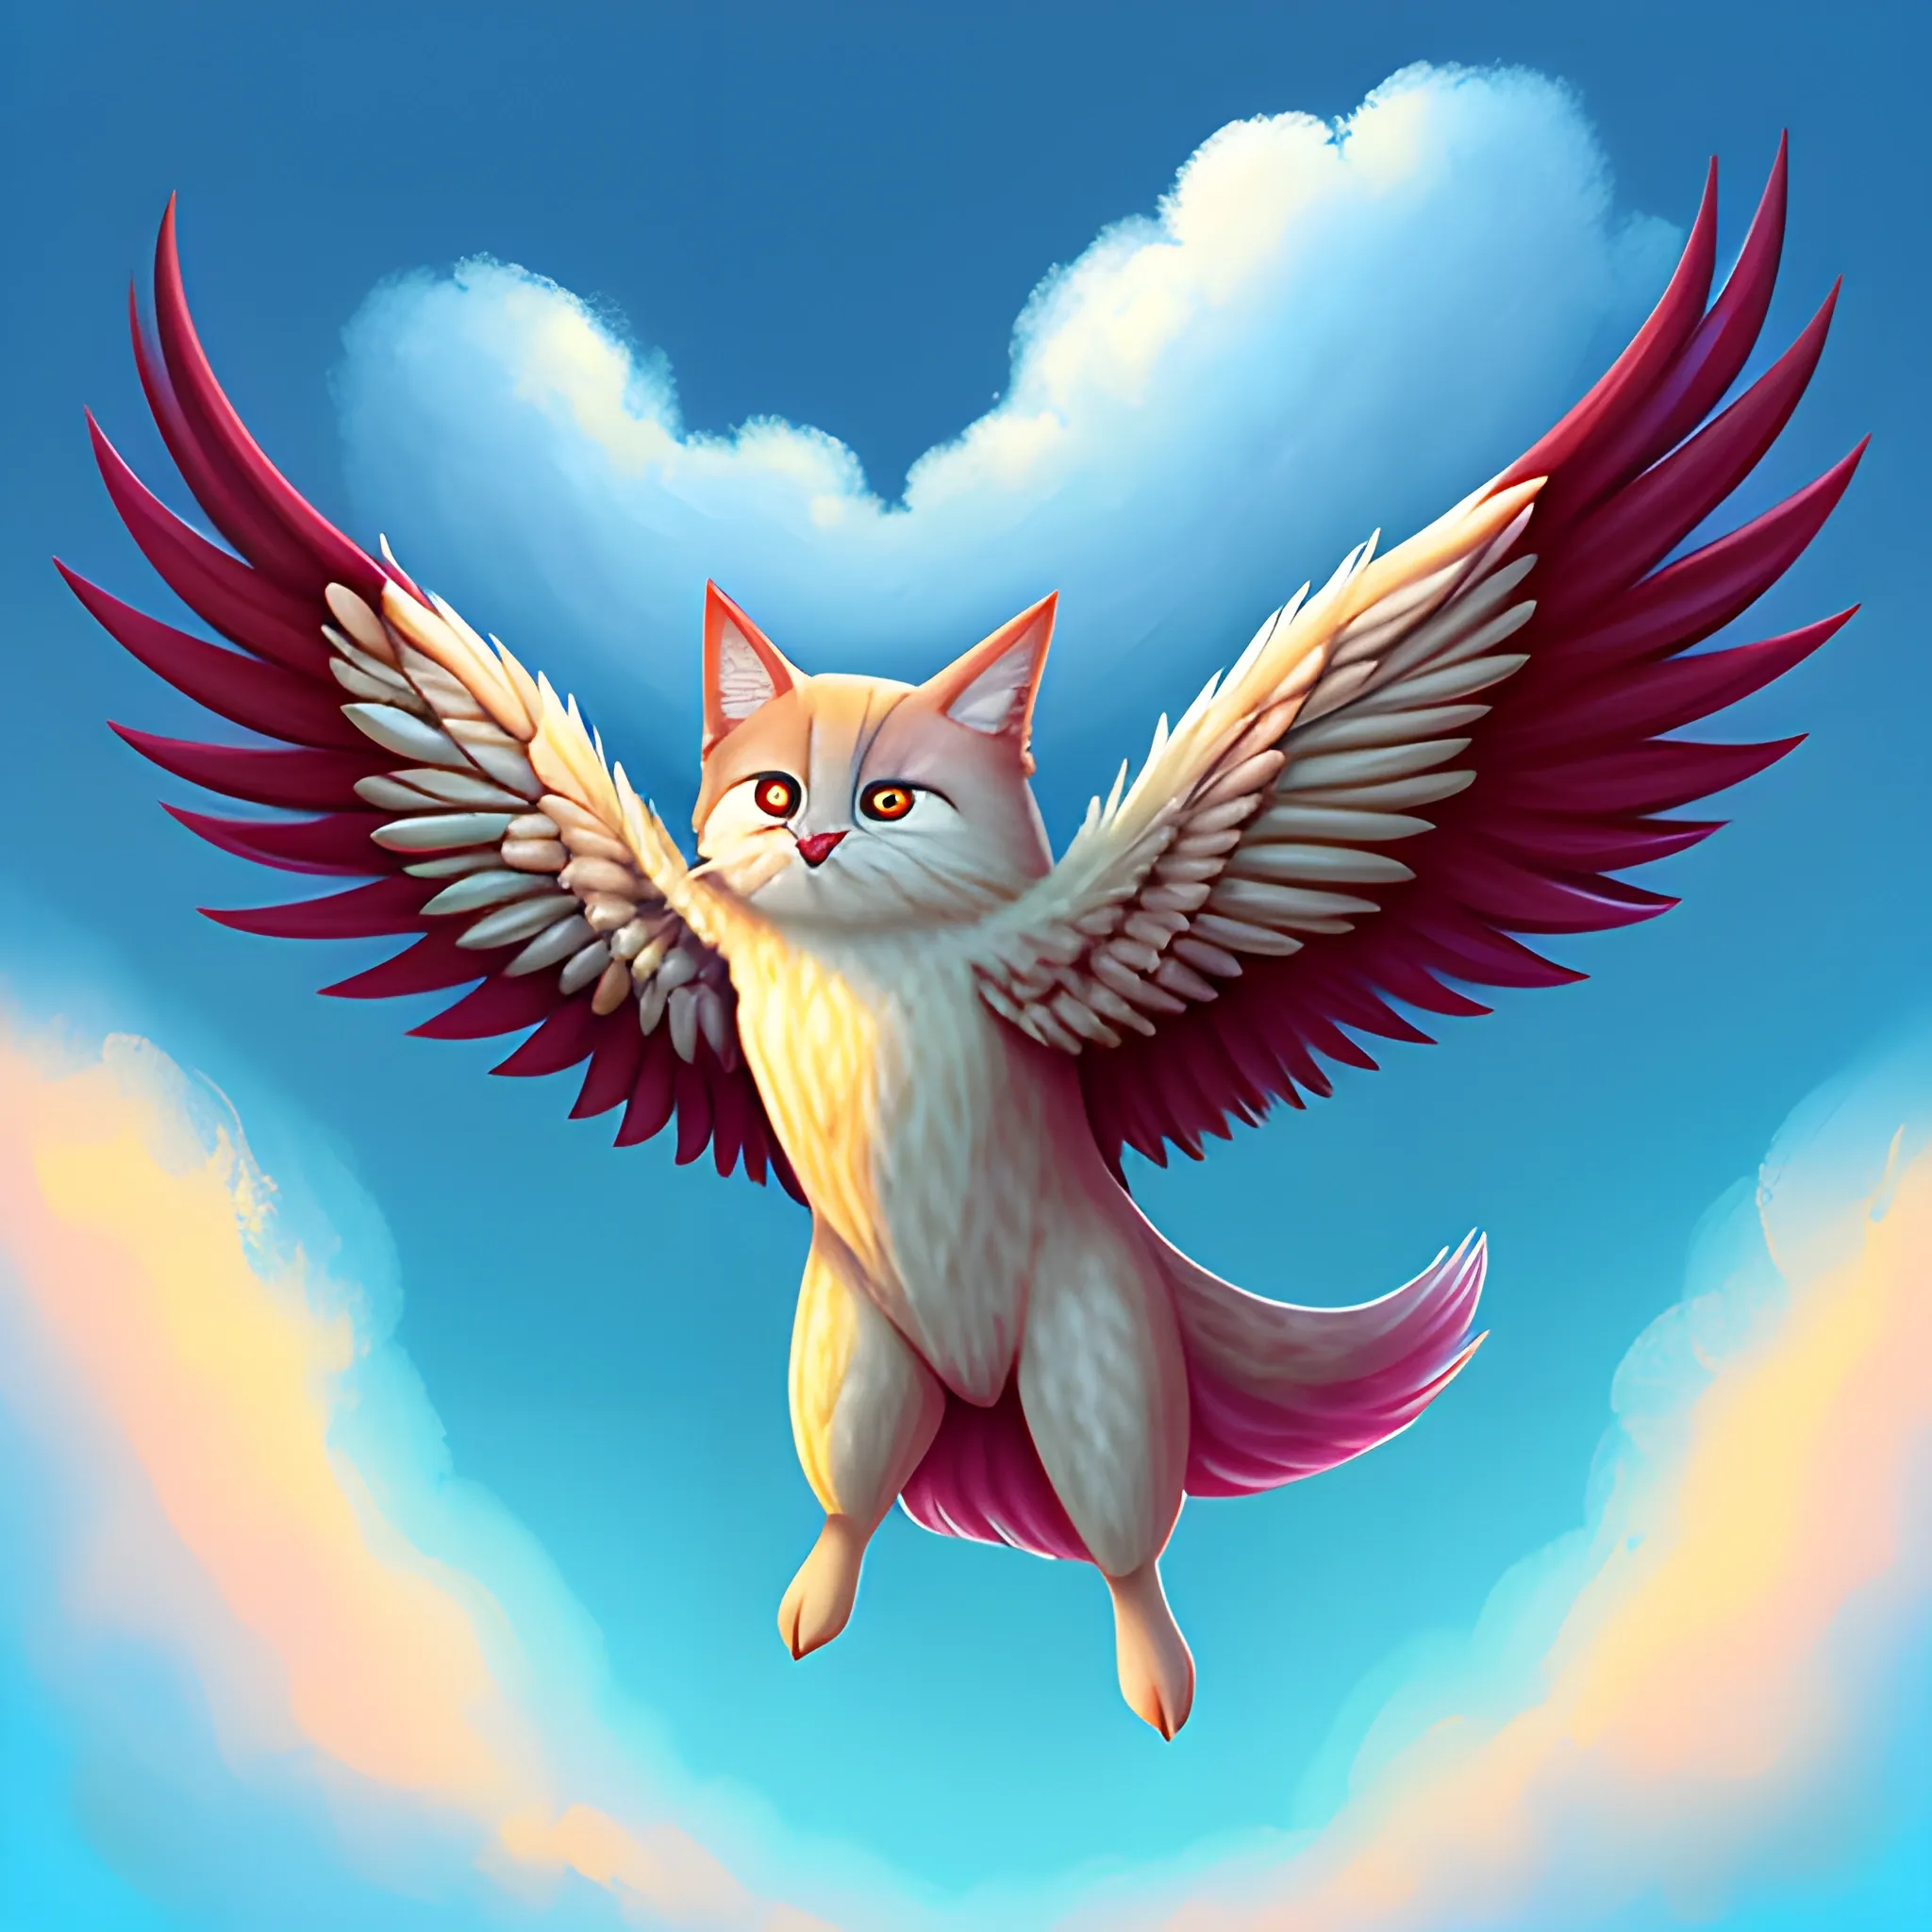 a little fluff flying through the skies, digital painting style in cool and warm colors